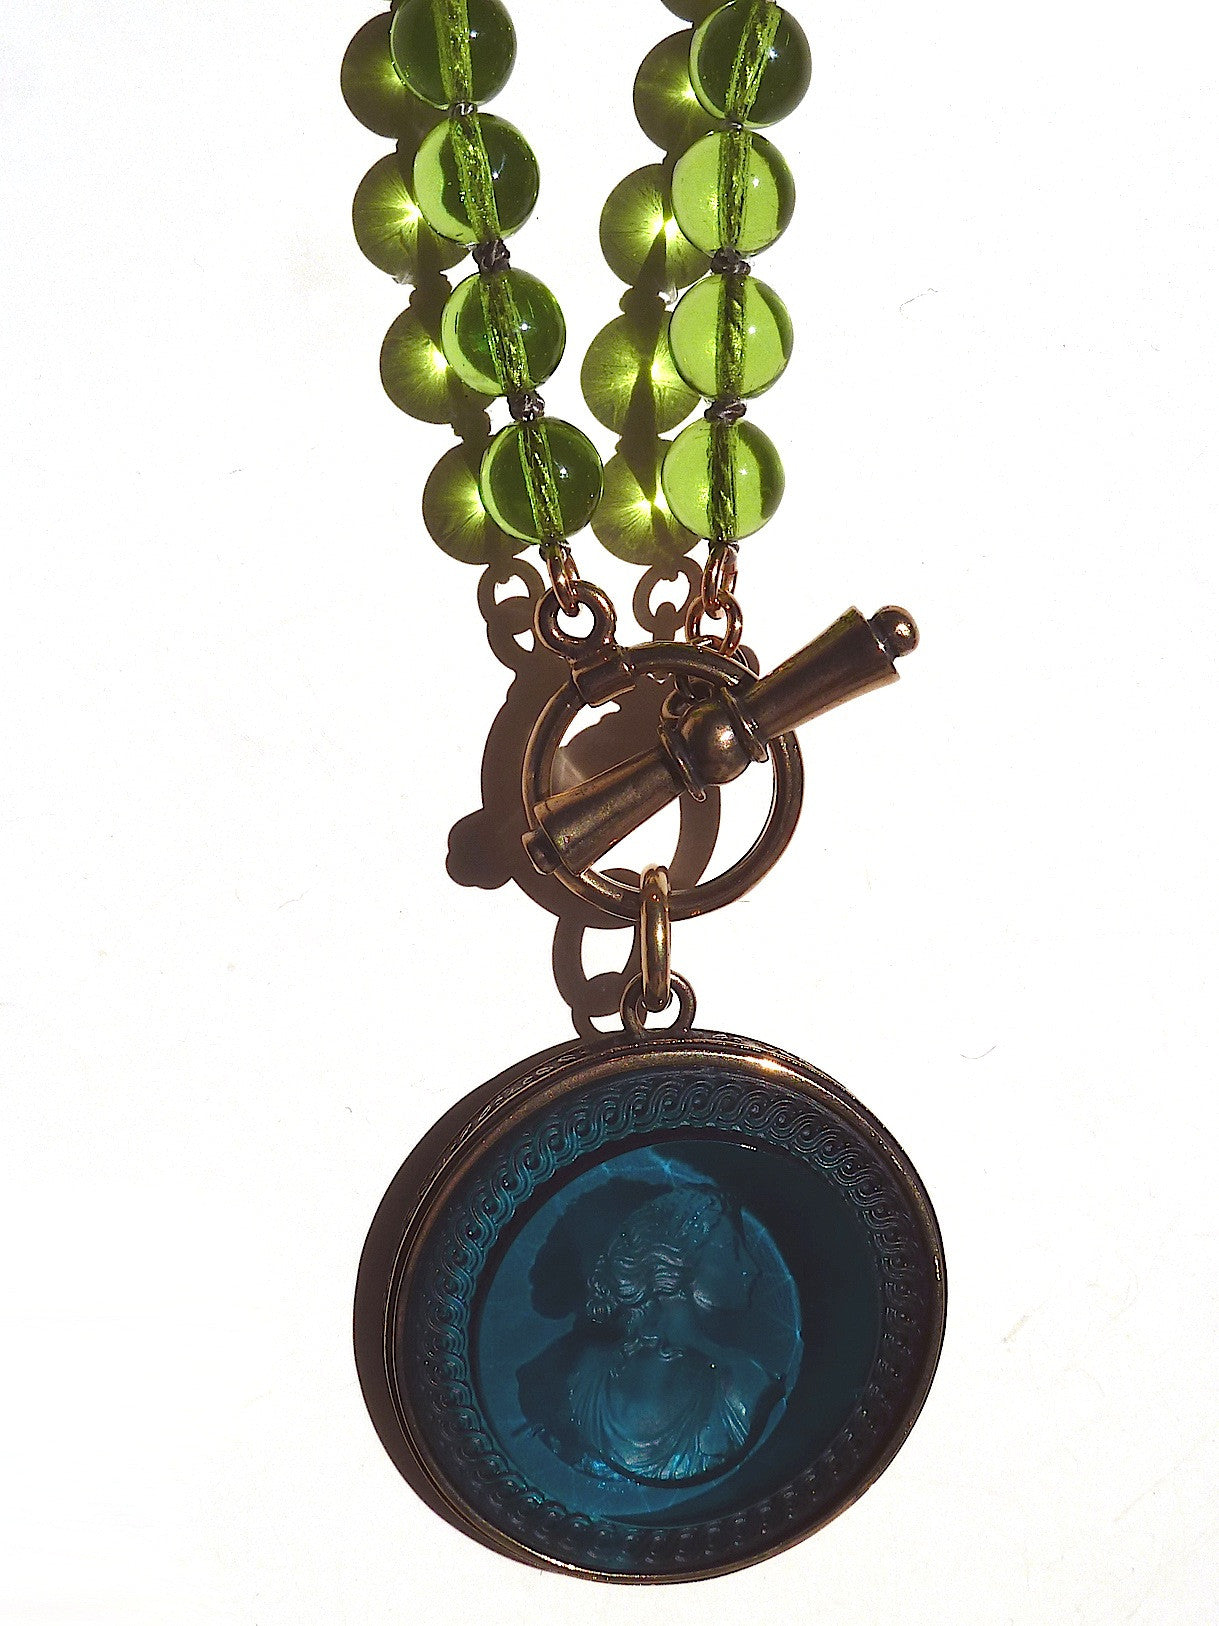 Necklace Intaglio On 30 Inch Glass Bead Periwinkle Bright Green